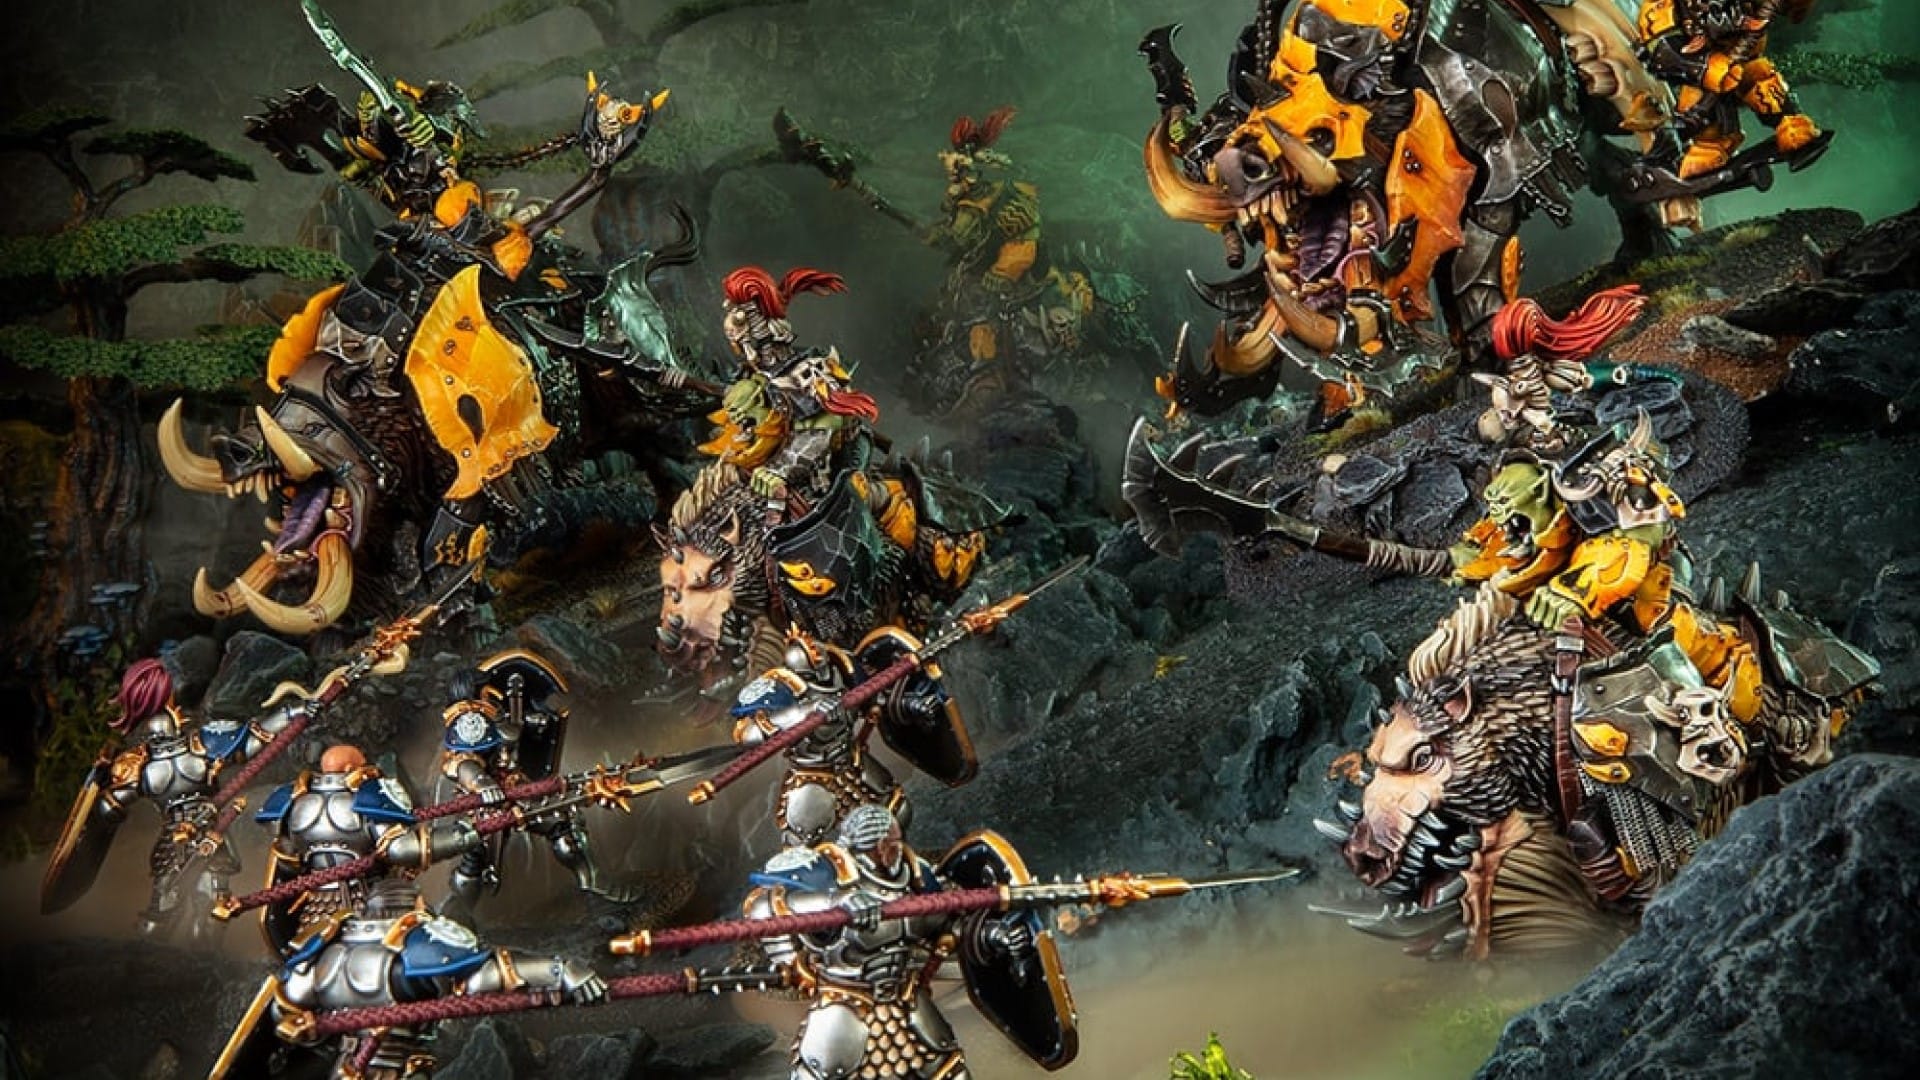 A screenshot of miniatures from a game of Warhammer Age of Sigmar